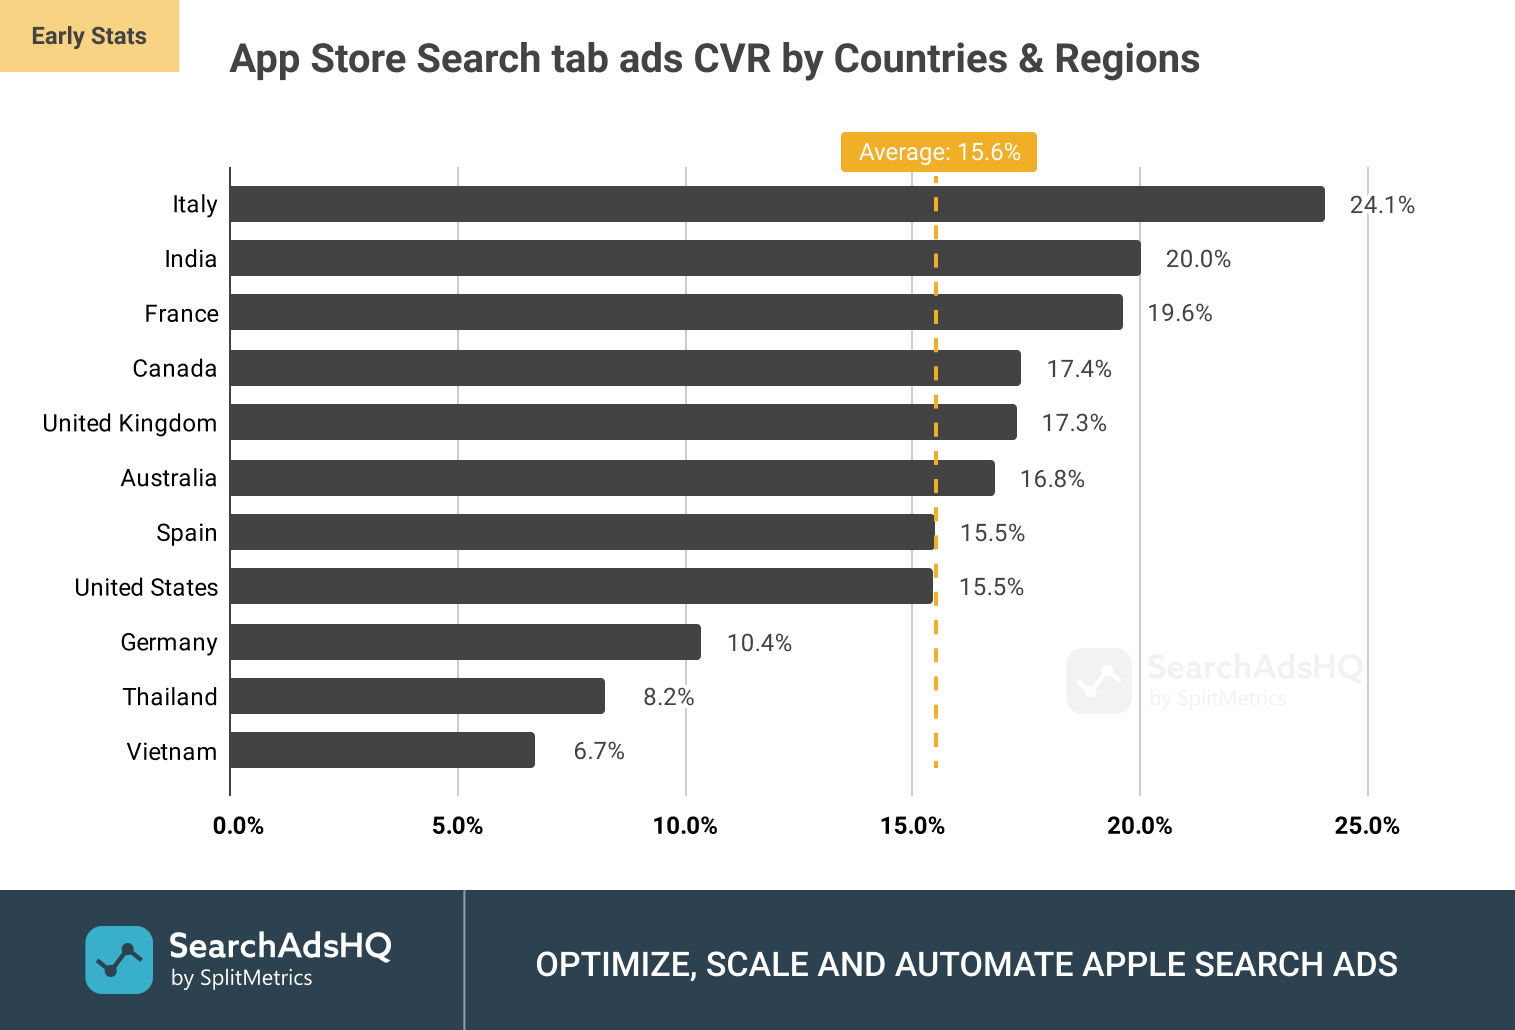 App Store Search tab ads: Average CR (Conversion Rate) by Countries and Regions